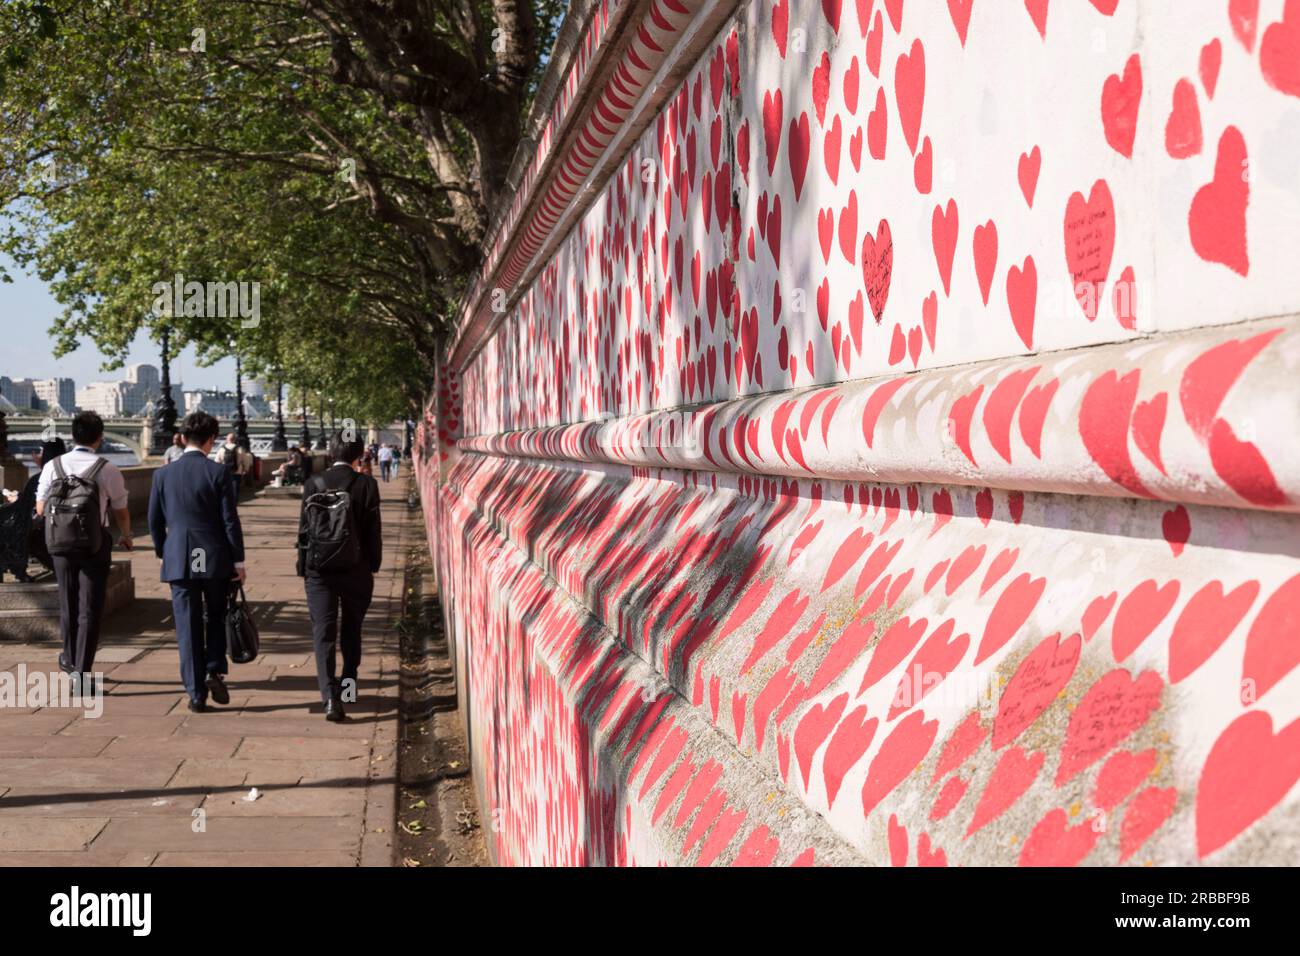 Red and Pink Hearts an der National Covid Memorial Wall, London, England, Großbritannien. Stockfoto